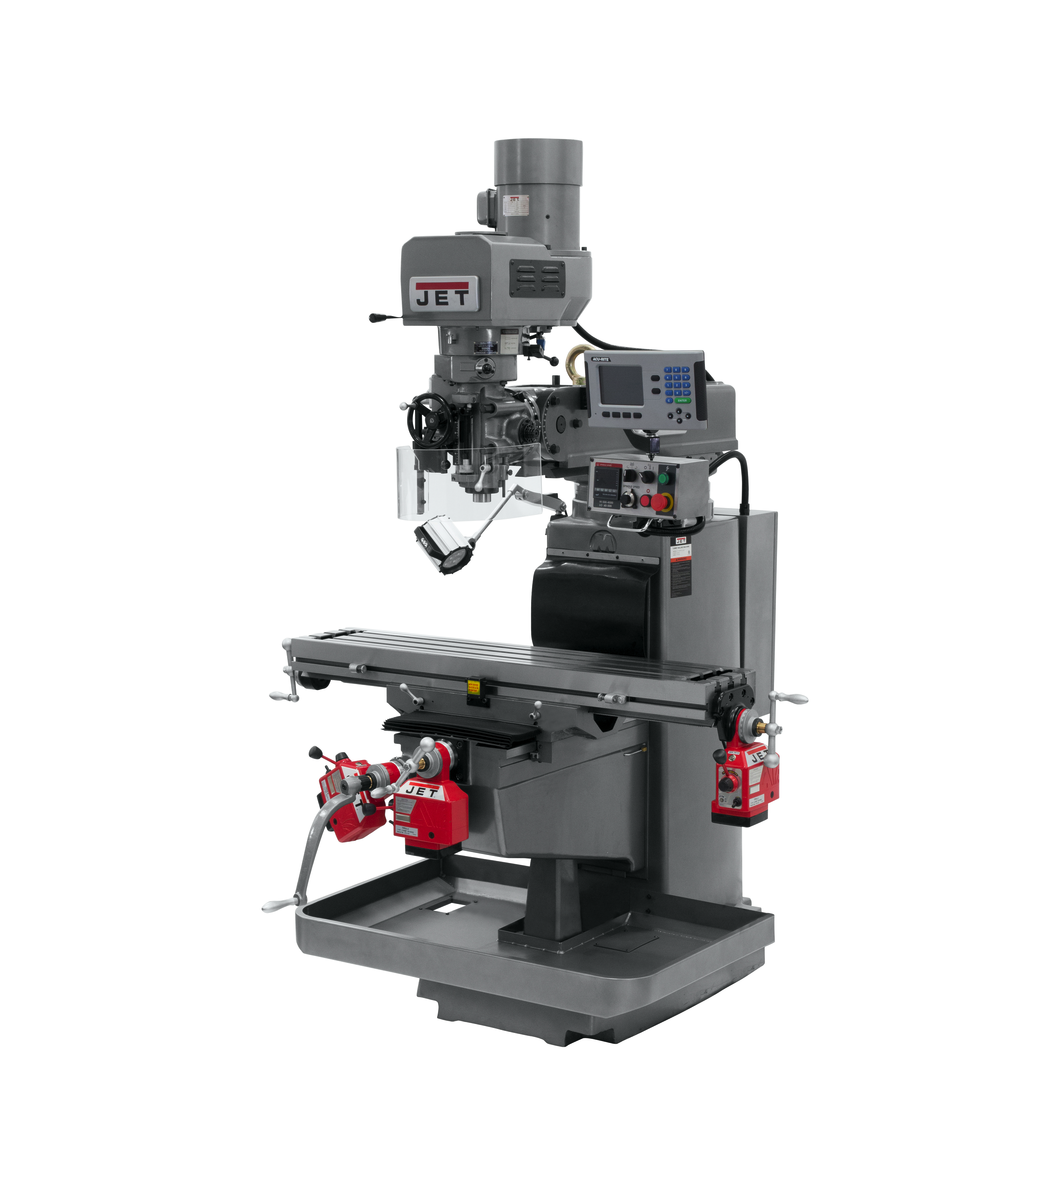 JTM-1050EVS2/230 Mill With 3-Axis Acu-Rite 203 DRO (Knee) With X, Y and Z-Axis Powerfeeds